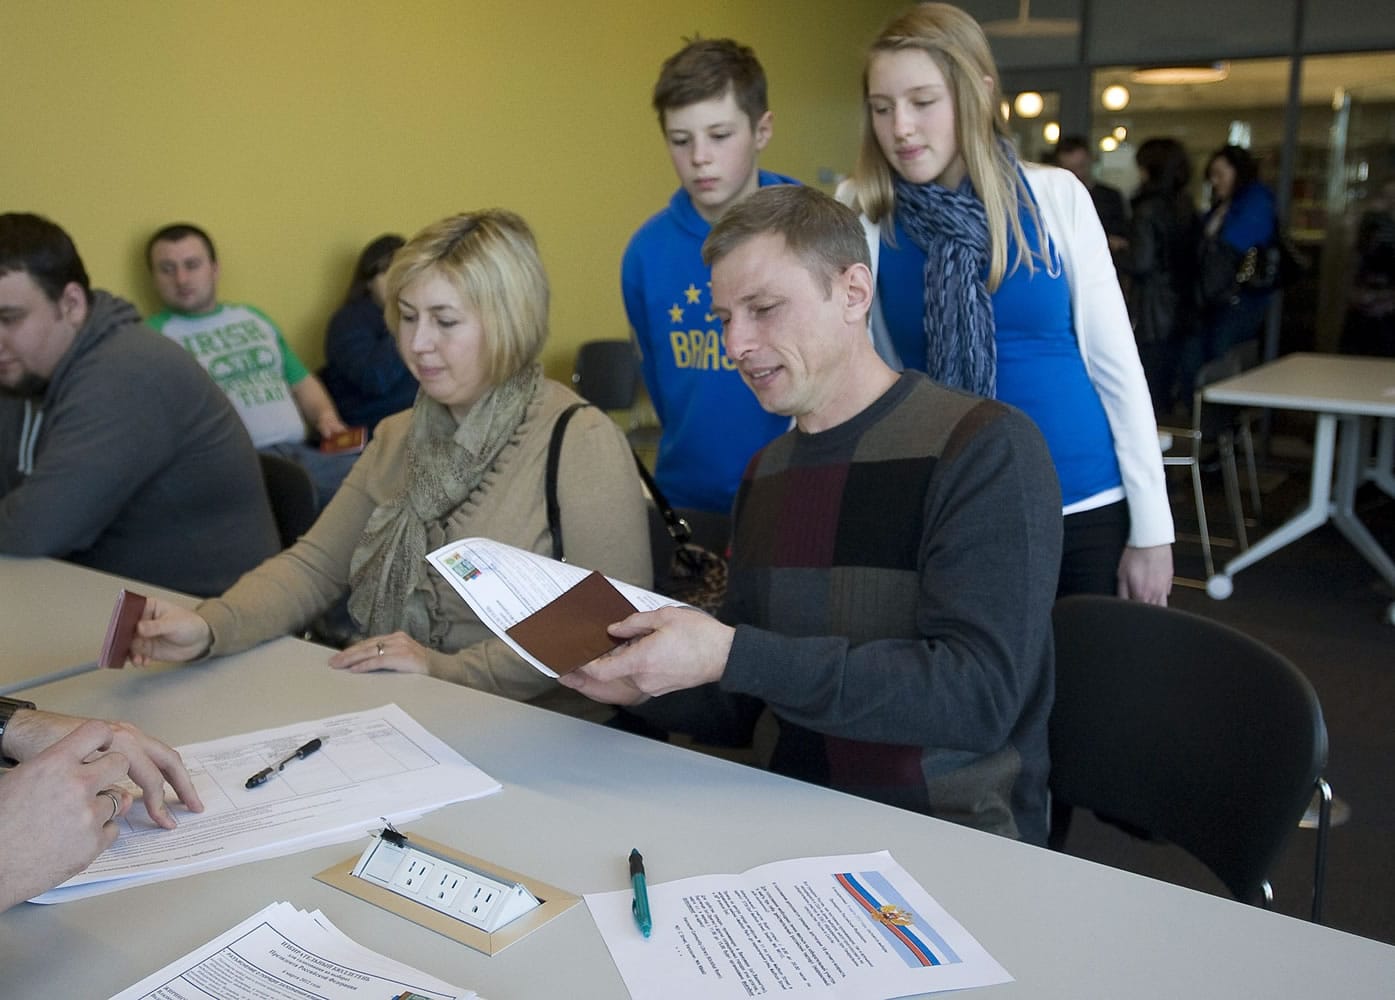 Russian citizens Olga and Andrey Dolbinin, of Vancouver have their information processed before casting their votes in the Russian presidential election on Sunday in the Vancouver Community Library's Klickitat Room. Their children Maksim, 12, and Irina, 15, look on.